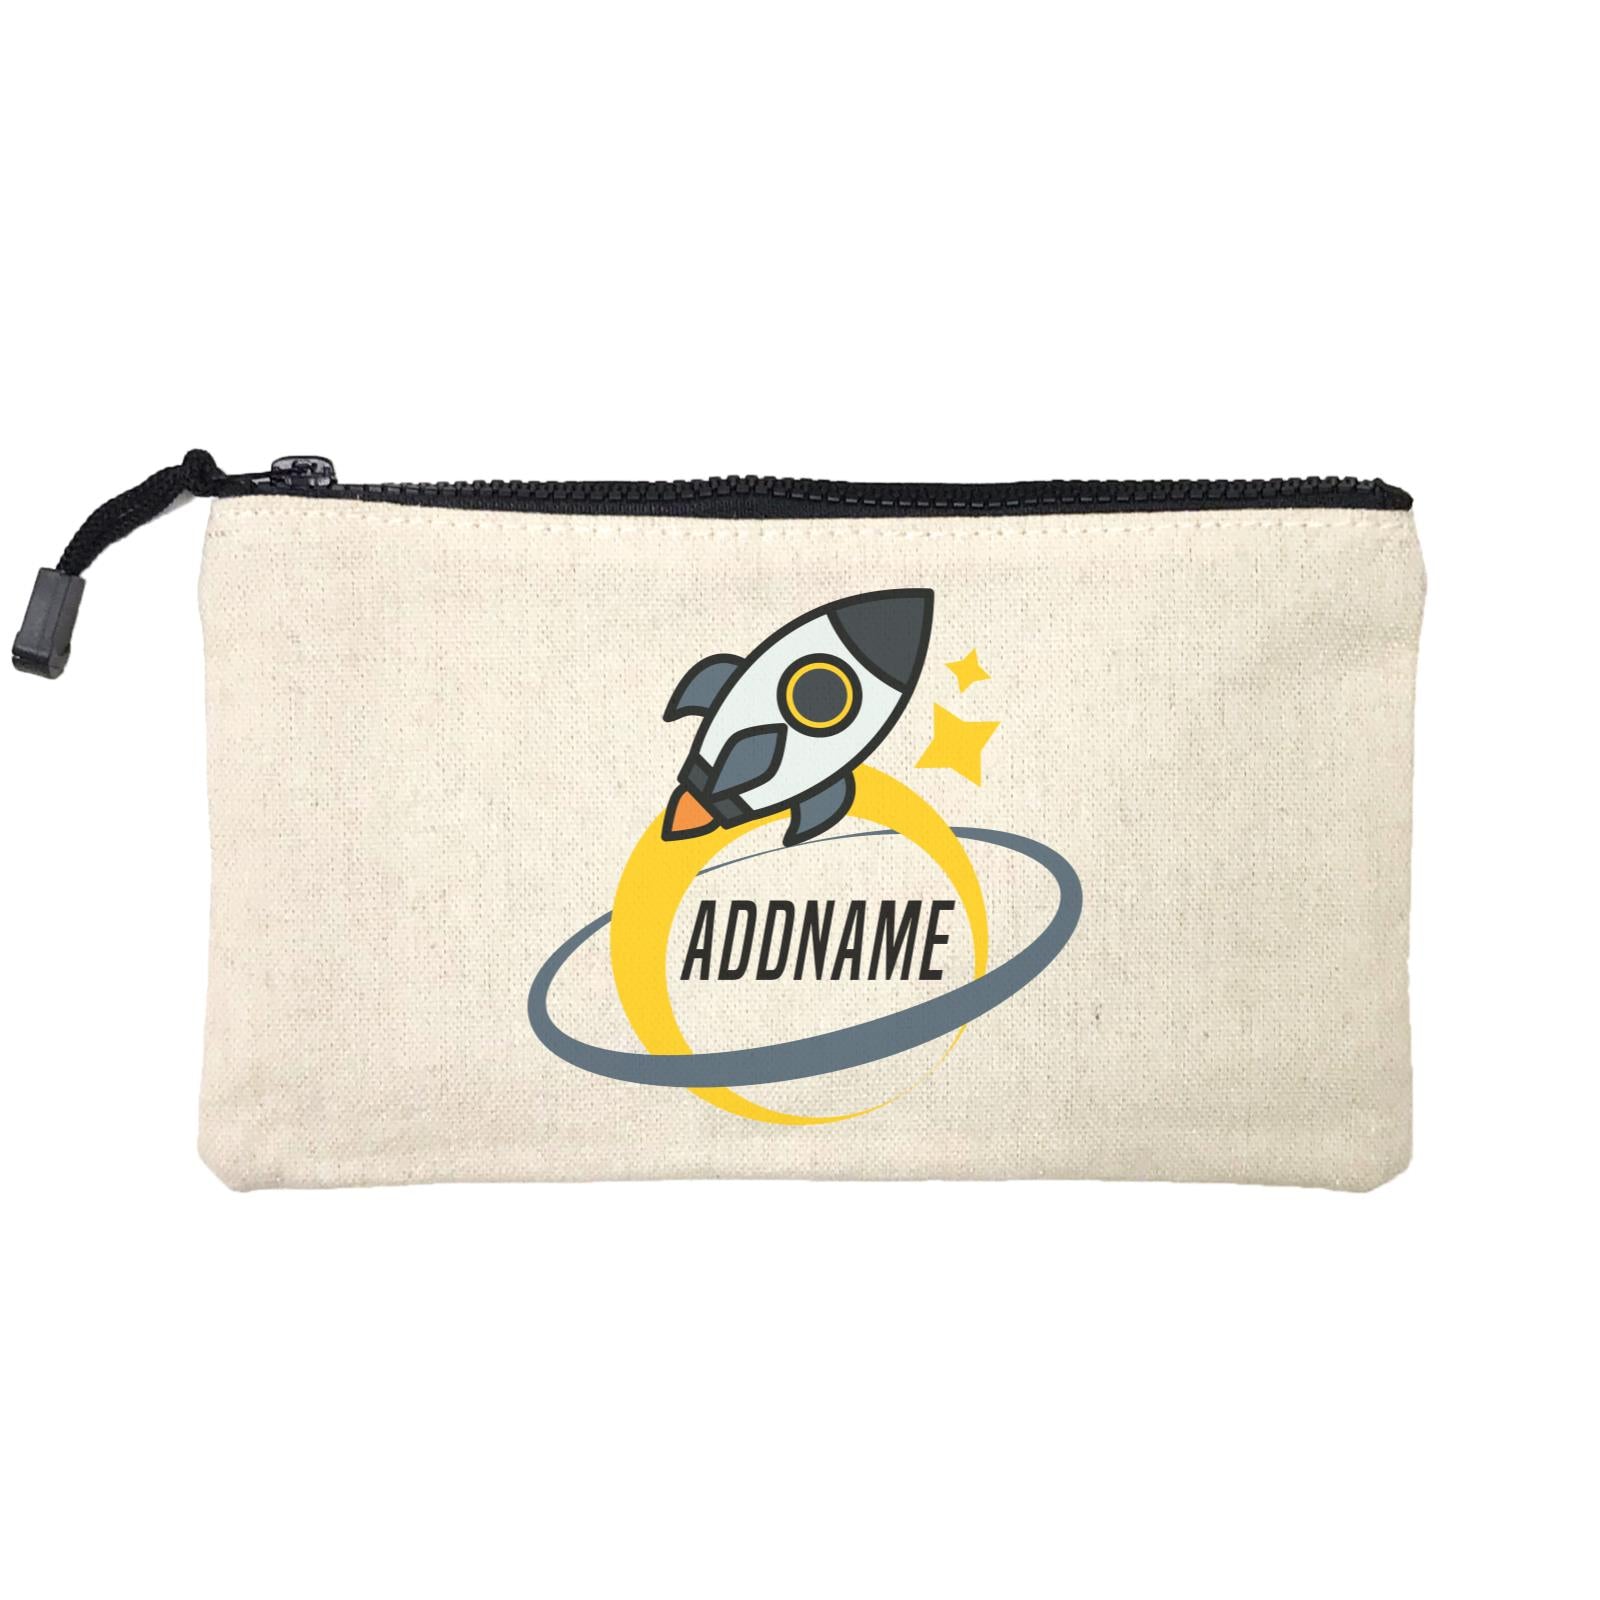 Birthday Rocket To Galaxy Moon And Star Addname Mini Accessories Stationery Pouch